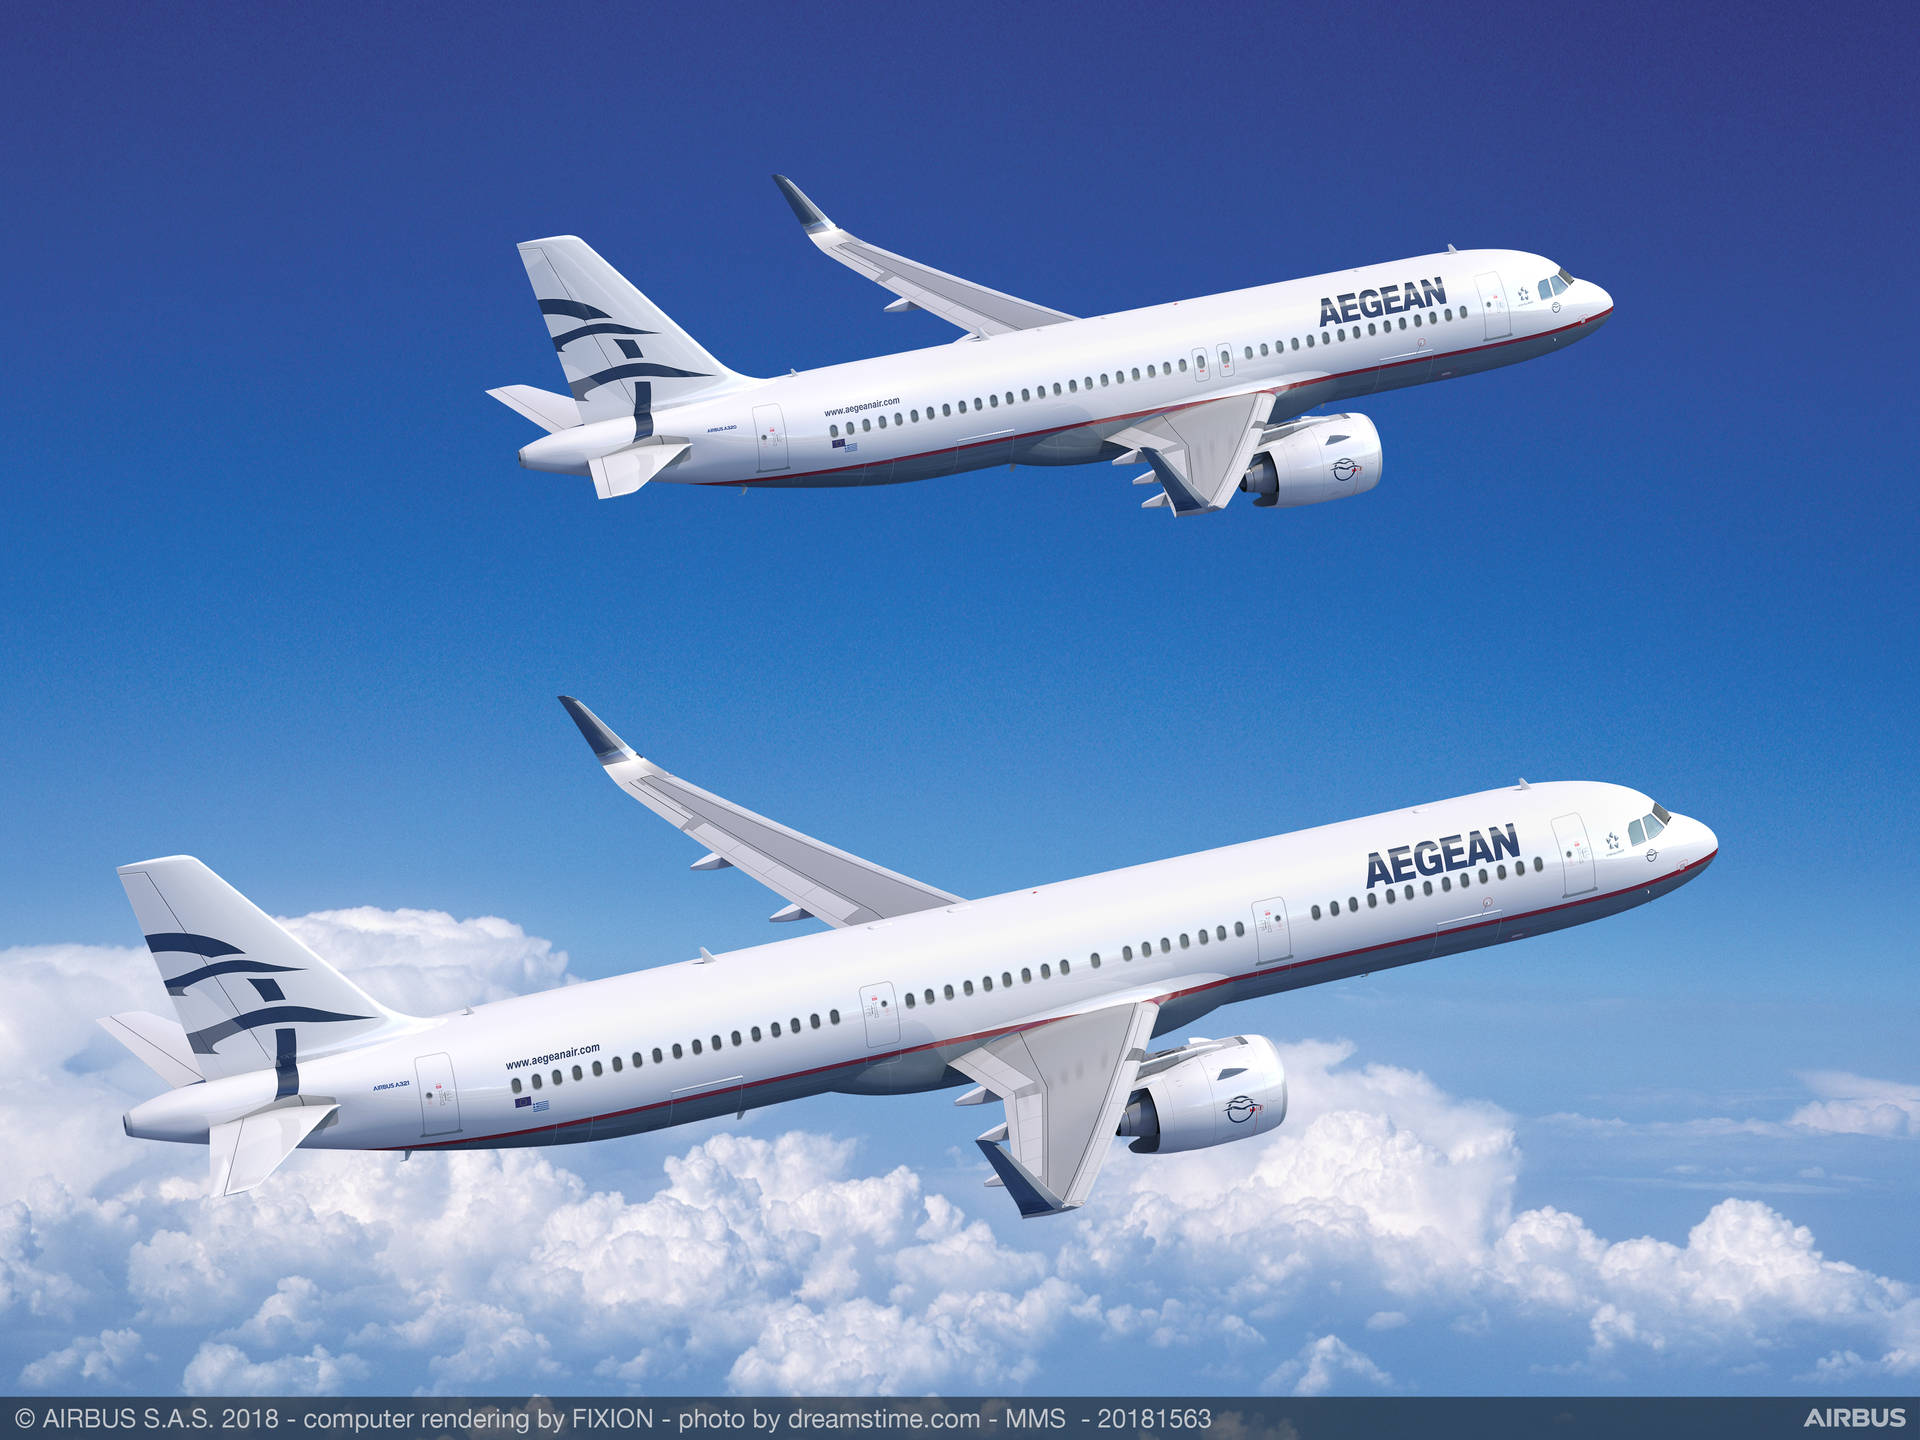 Flying Aegean Airlines Flag Carrier A320neo Planes Wallpaper